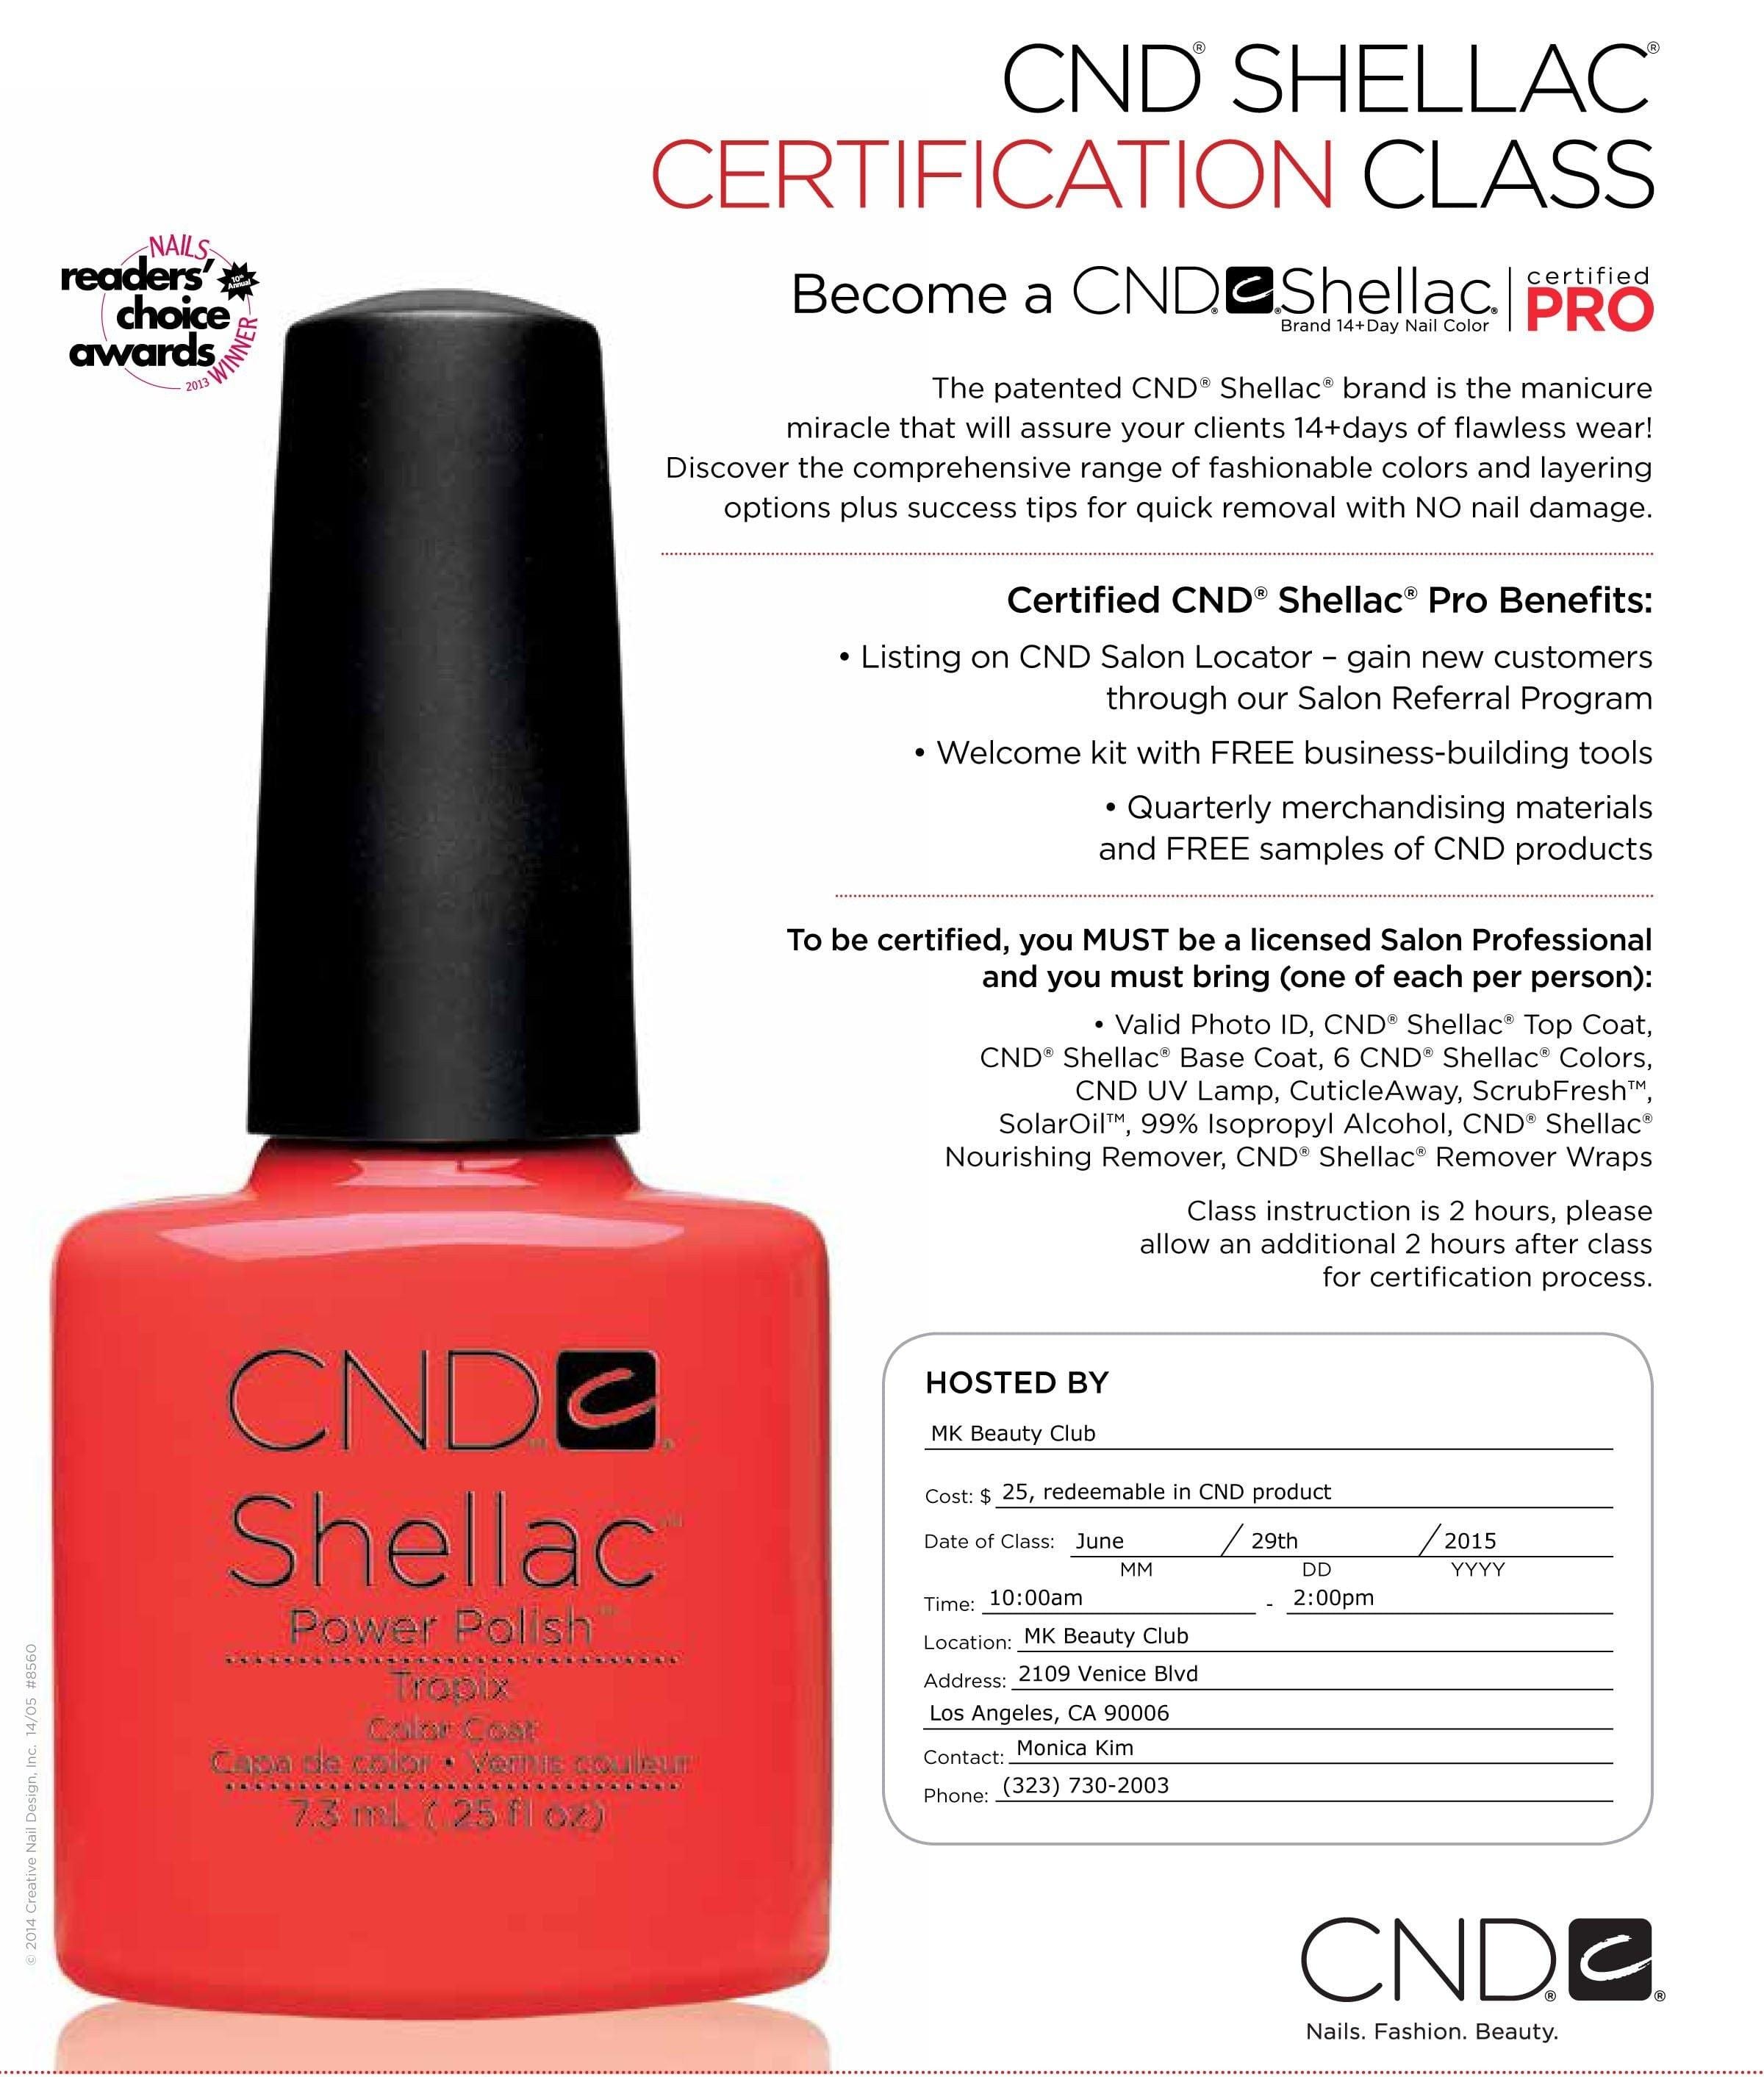 The Pros and Cons of a CND Shellac Manicure